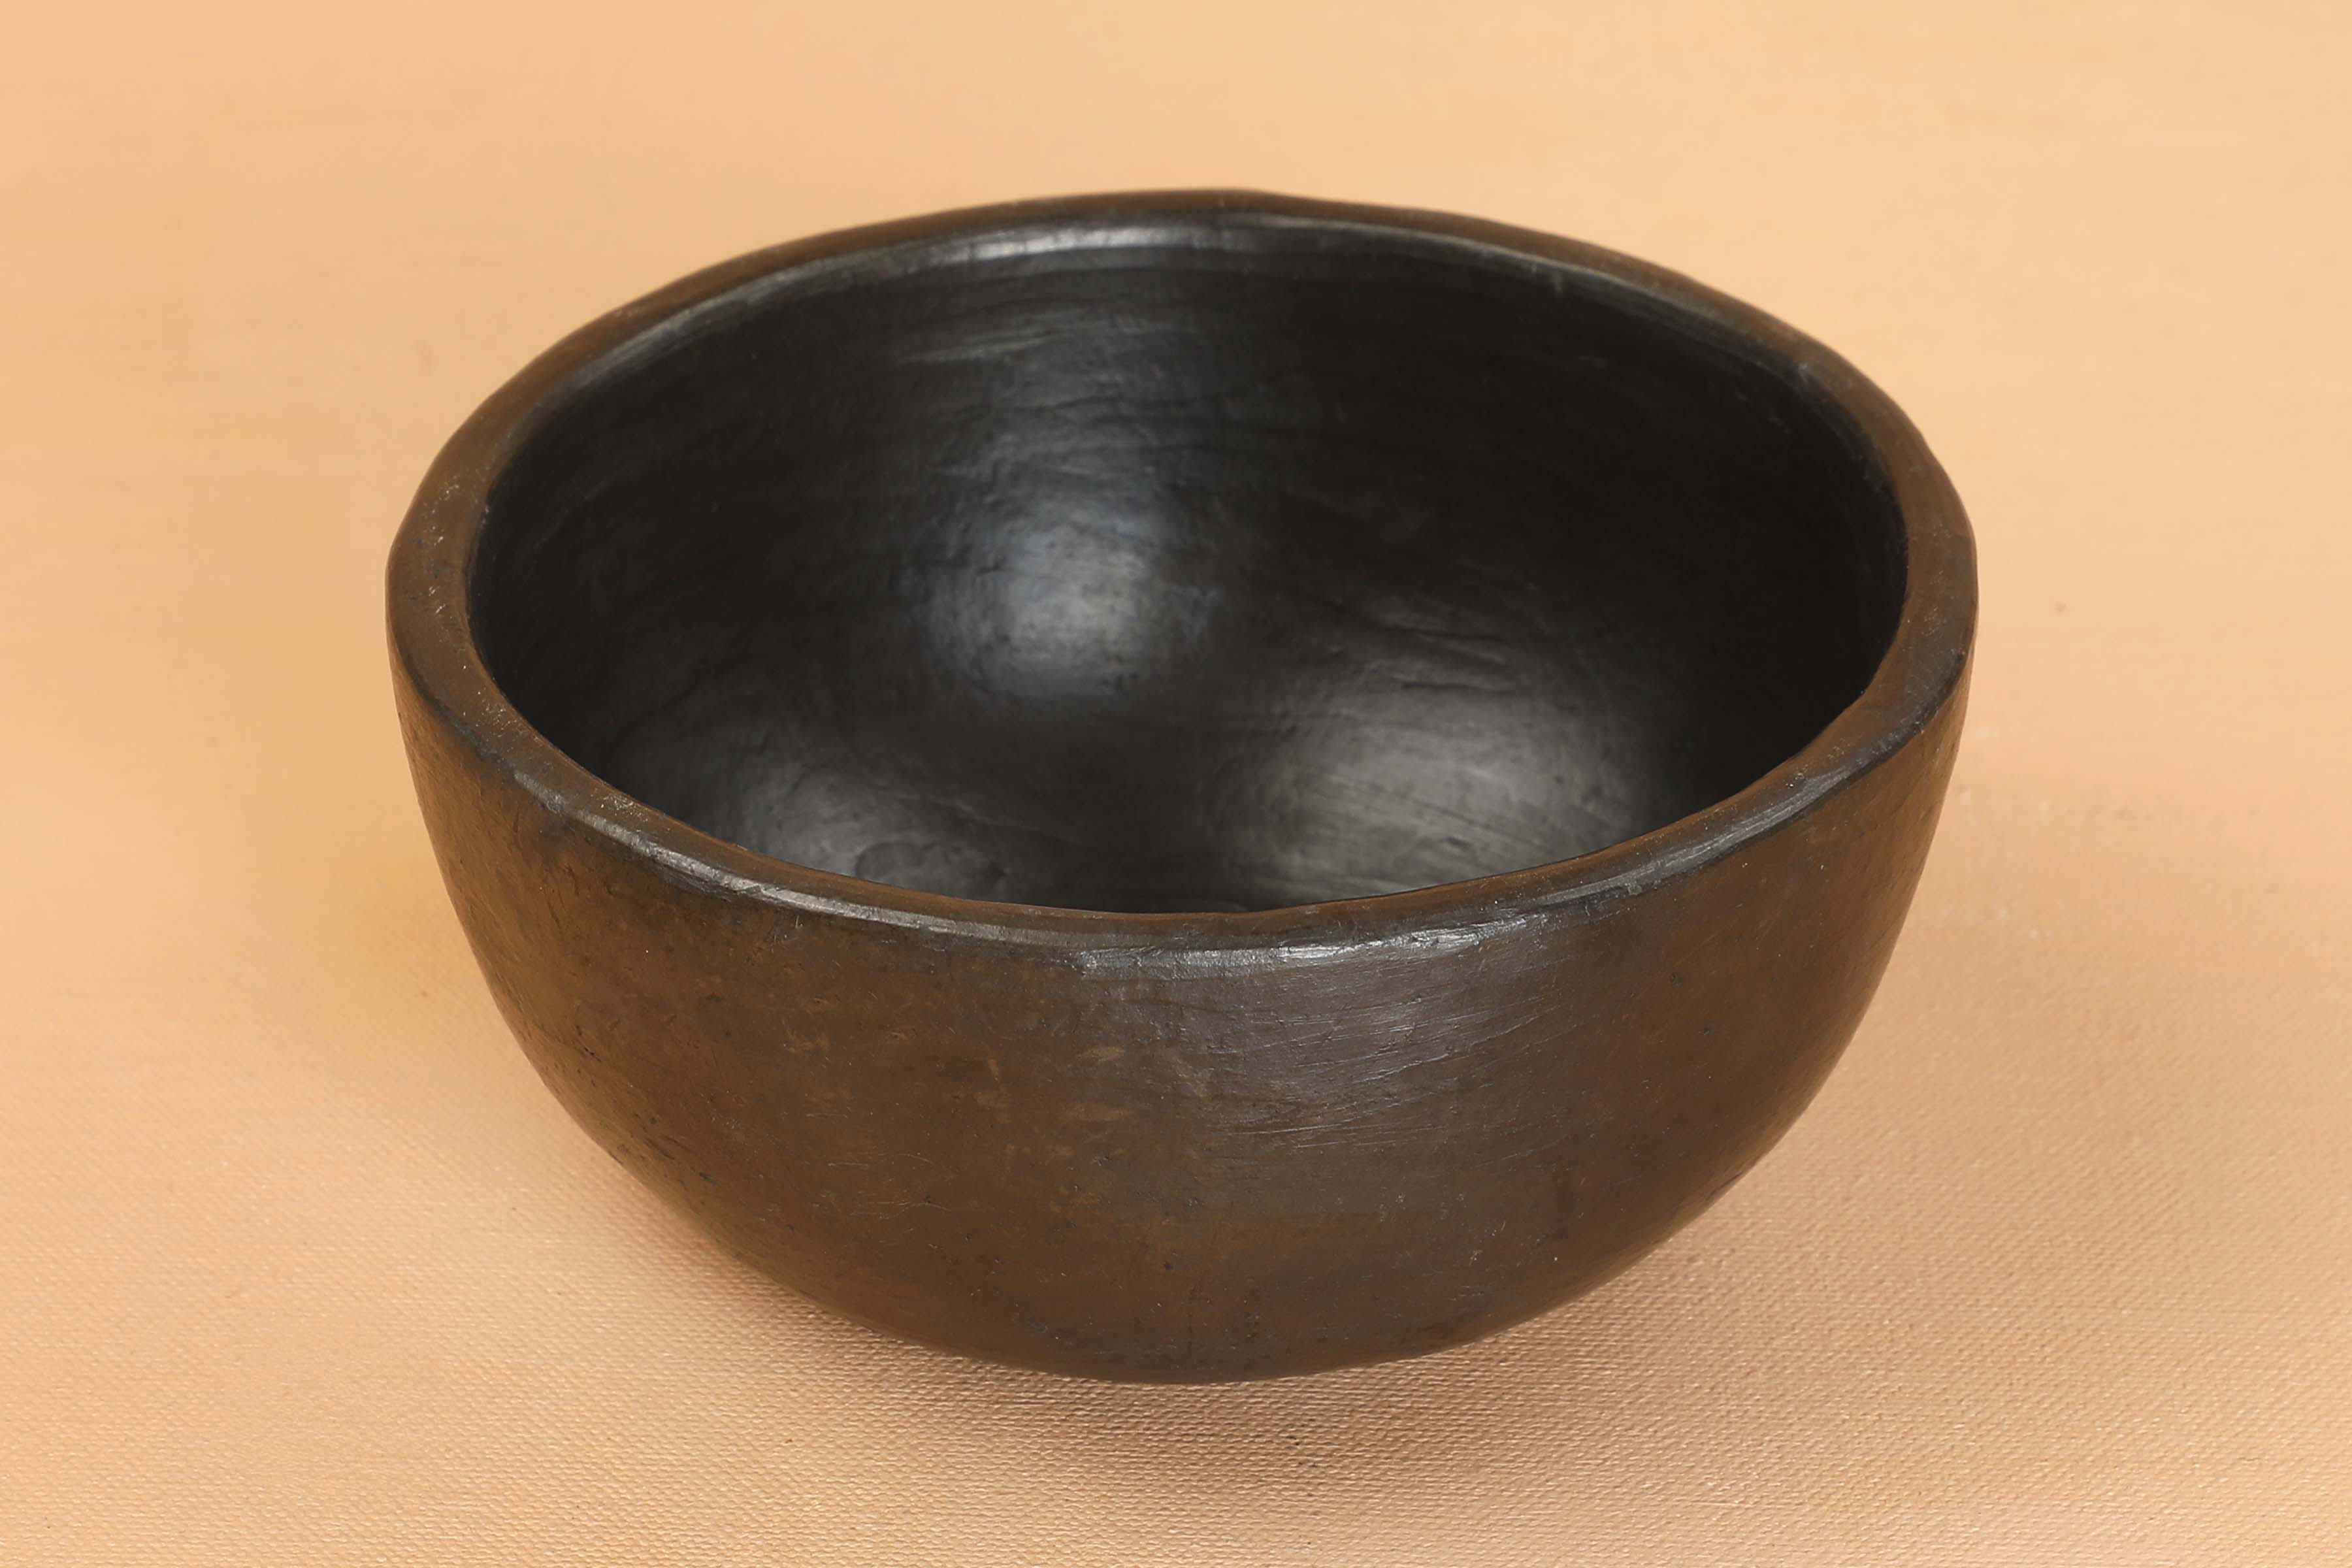 Earthenware Clay Longpi Pottery Bowl, 6x2 Inch (Set of 2)